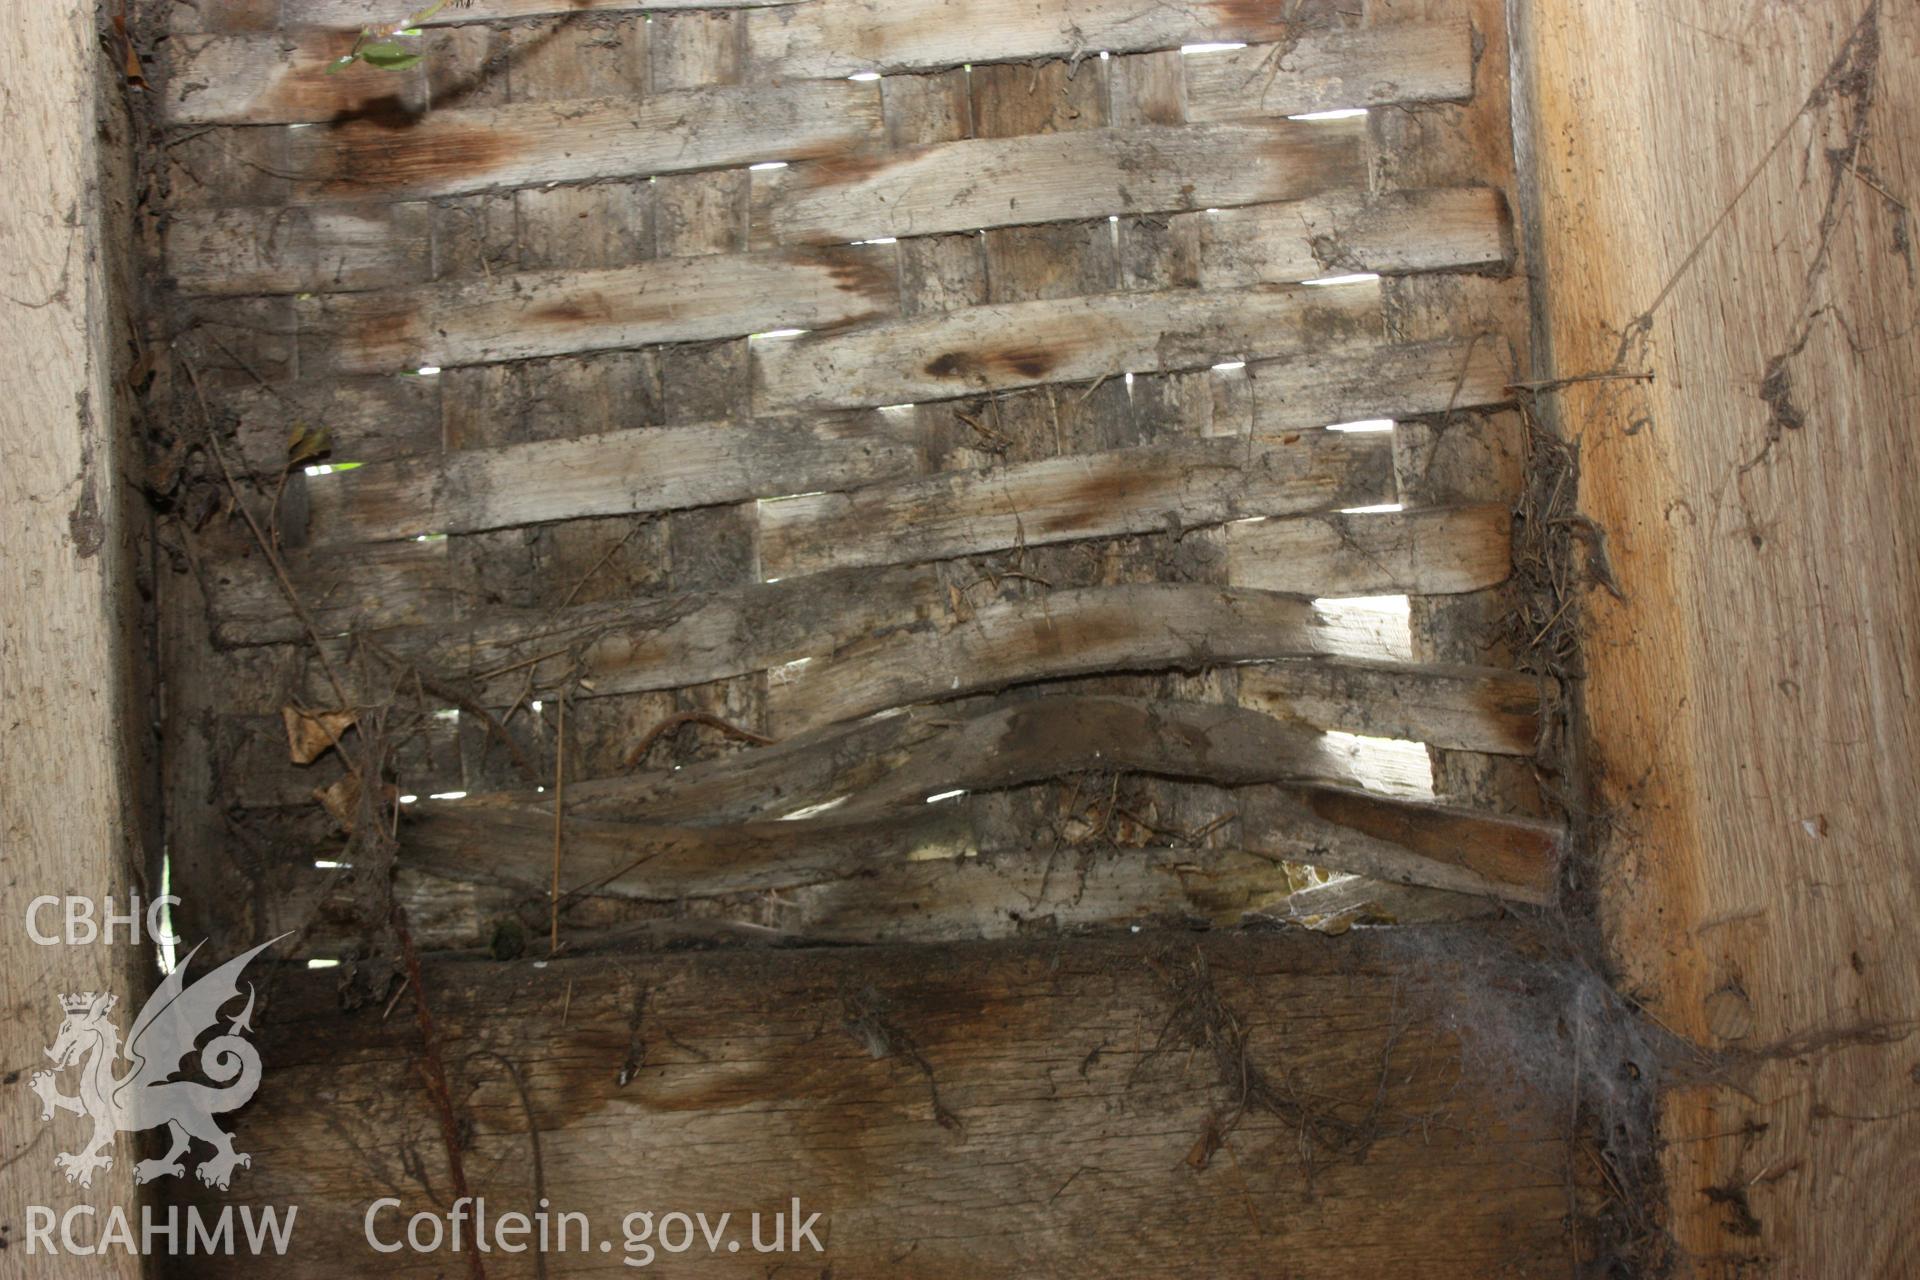 Woven wooden panelling. Photographic survey of Marian Mawr in Cwm, Denbighshire by Geoff Ward on 20th August 2010.